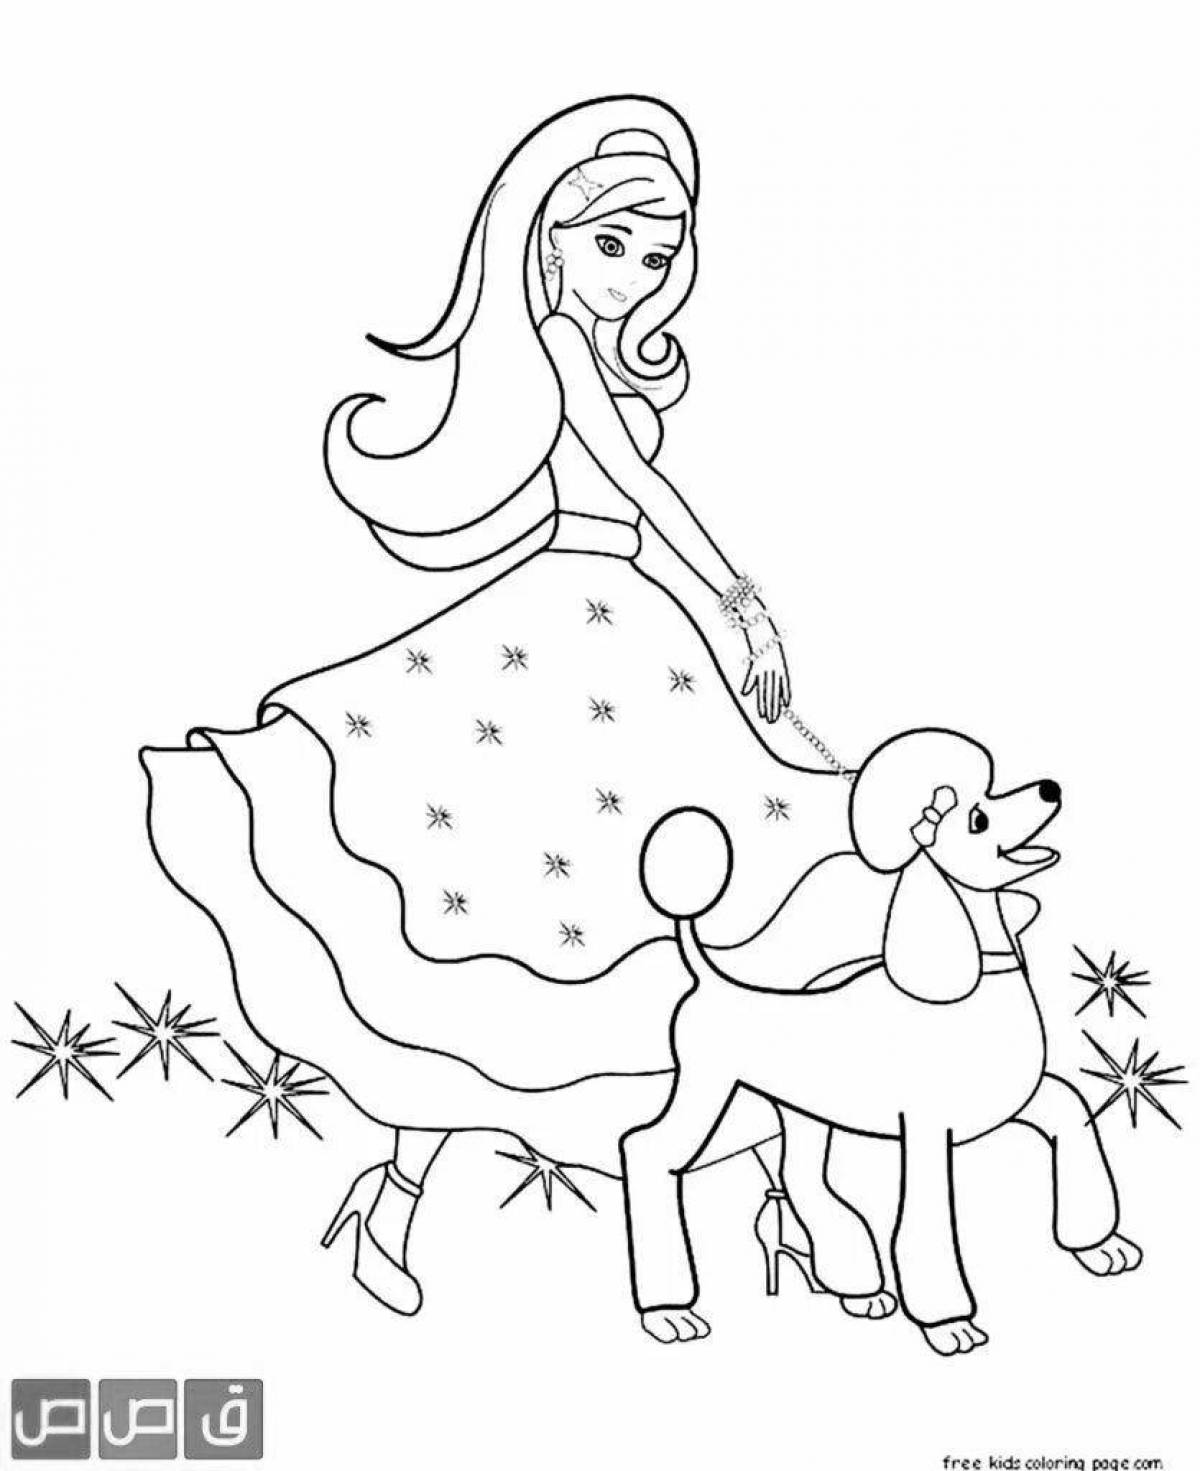 Fancy coloring barbie with a dog